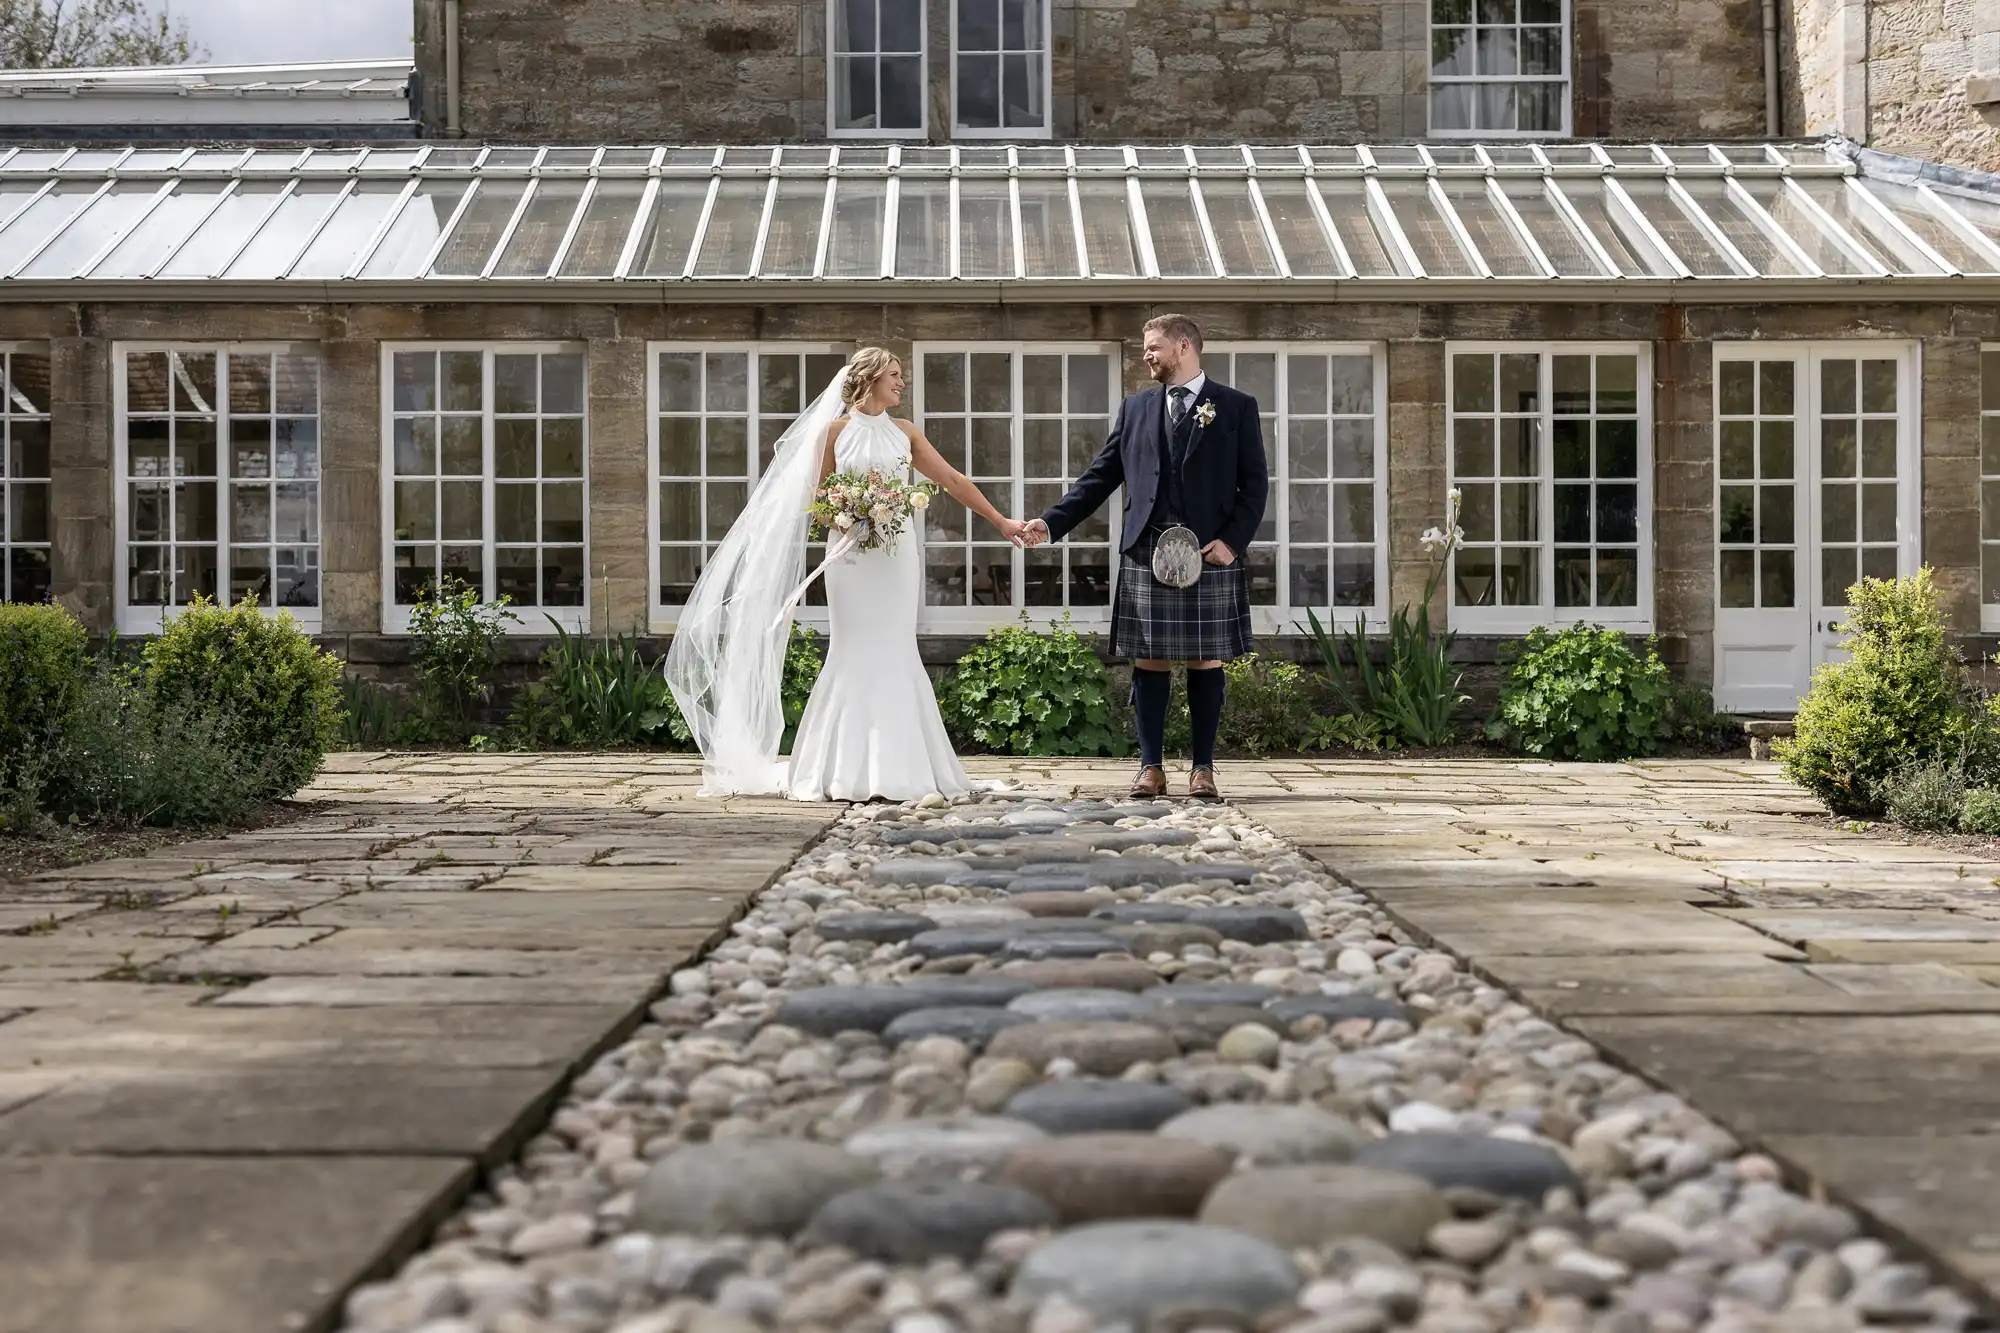 A bride in a white dress and a groom in a kilt holding hands in front of a stone building with large windows and a glass roof.